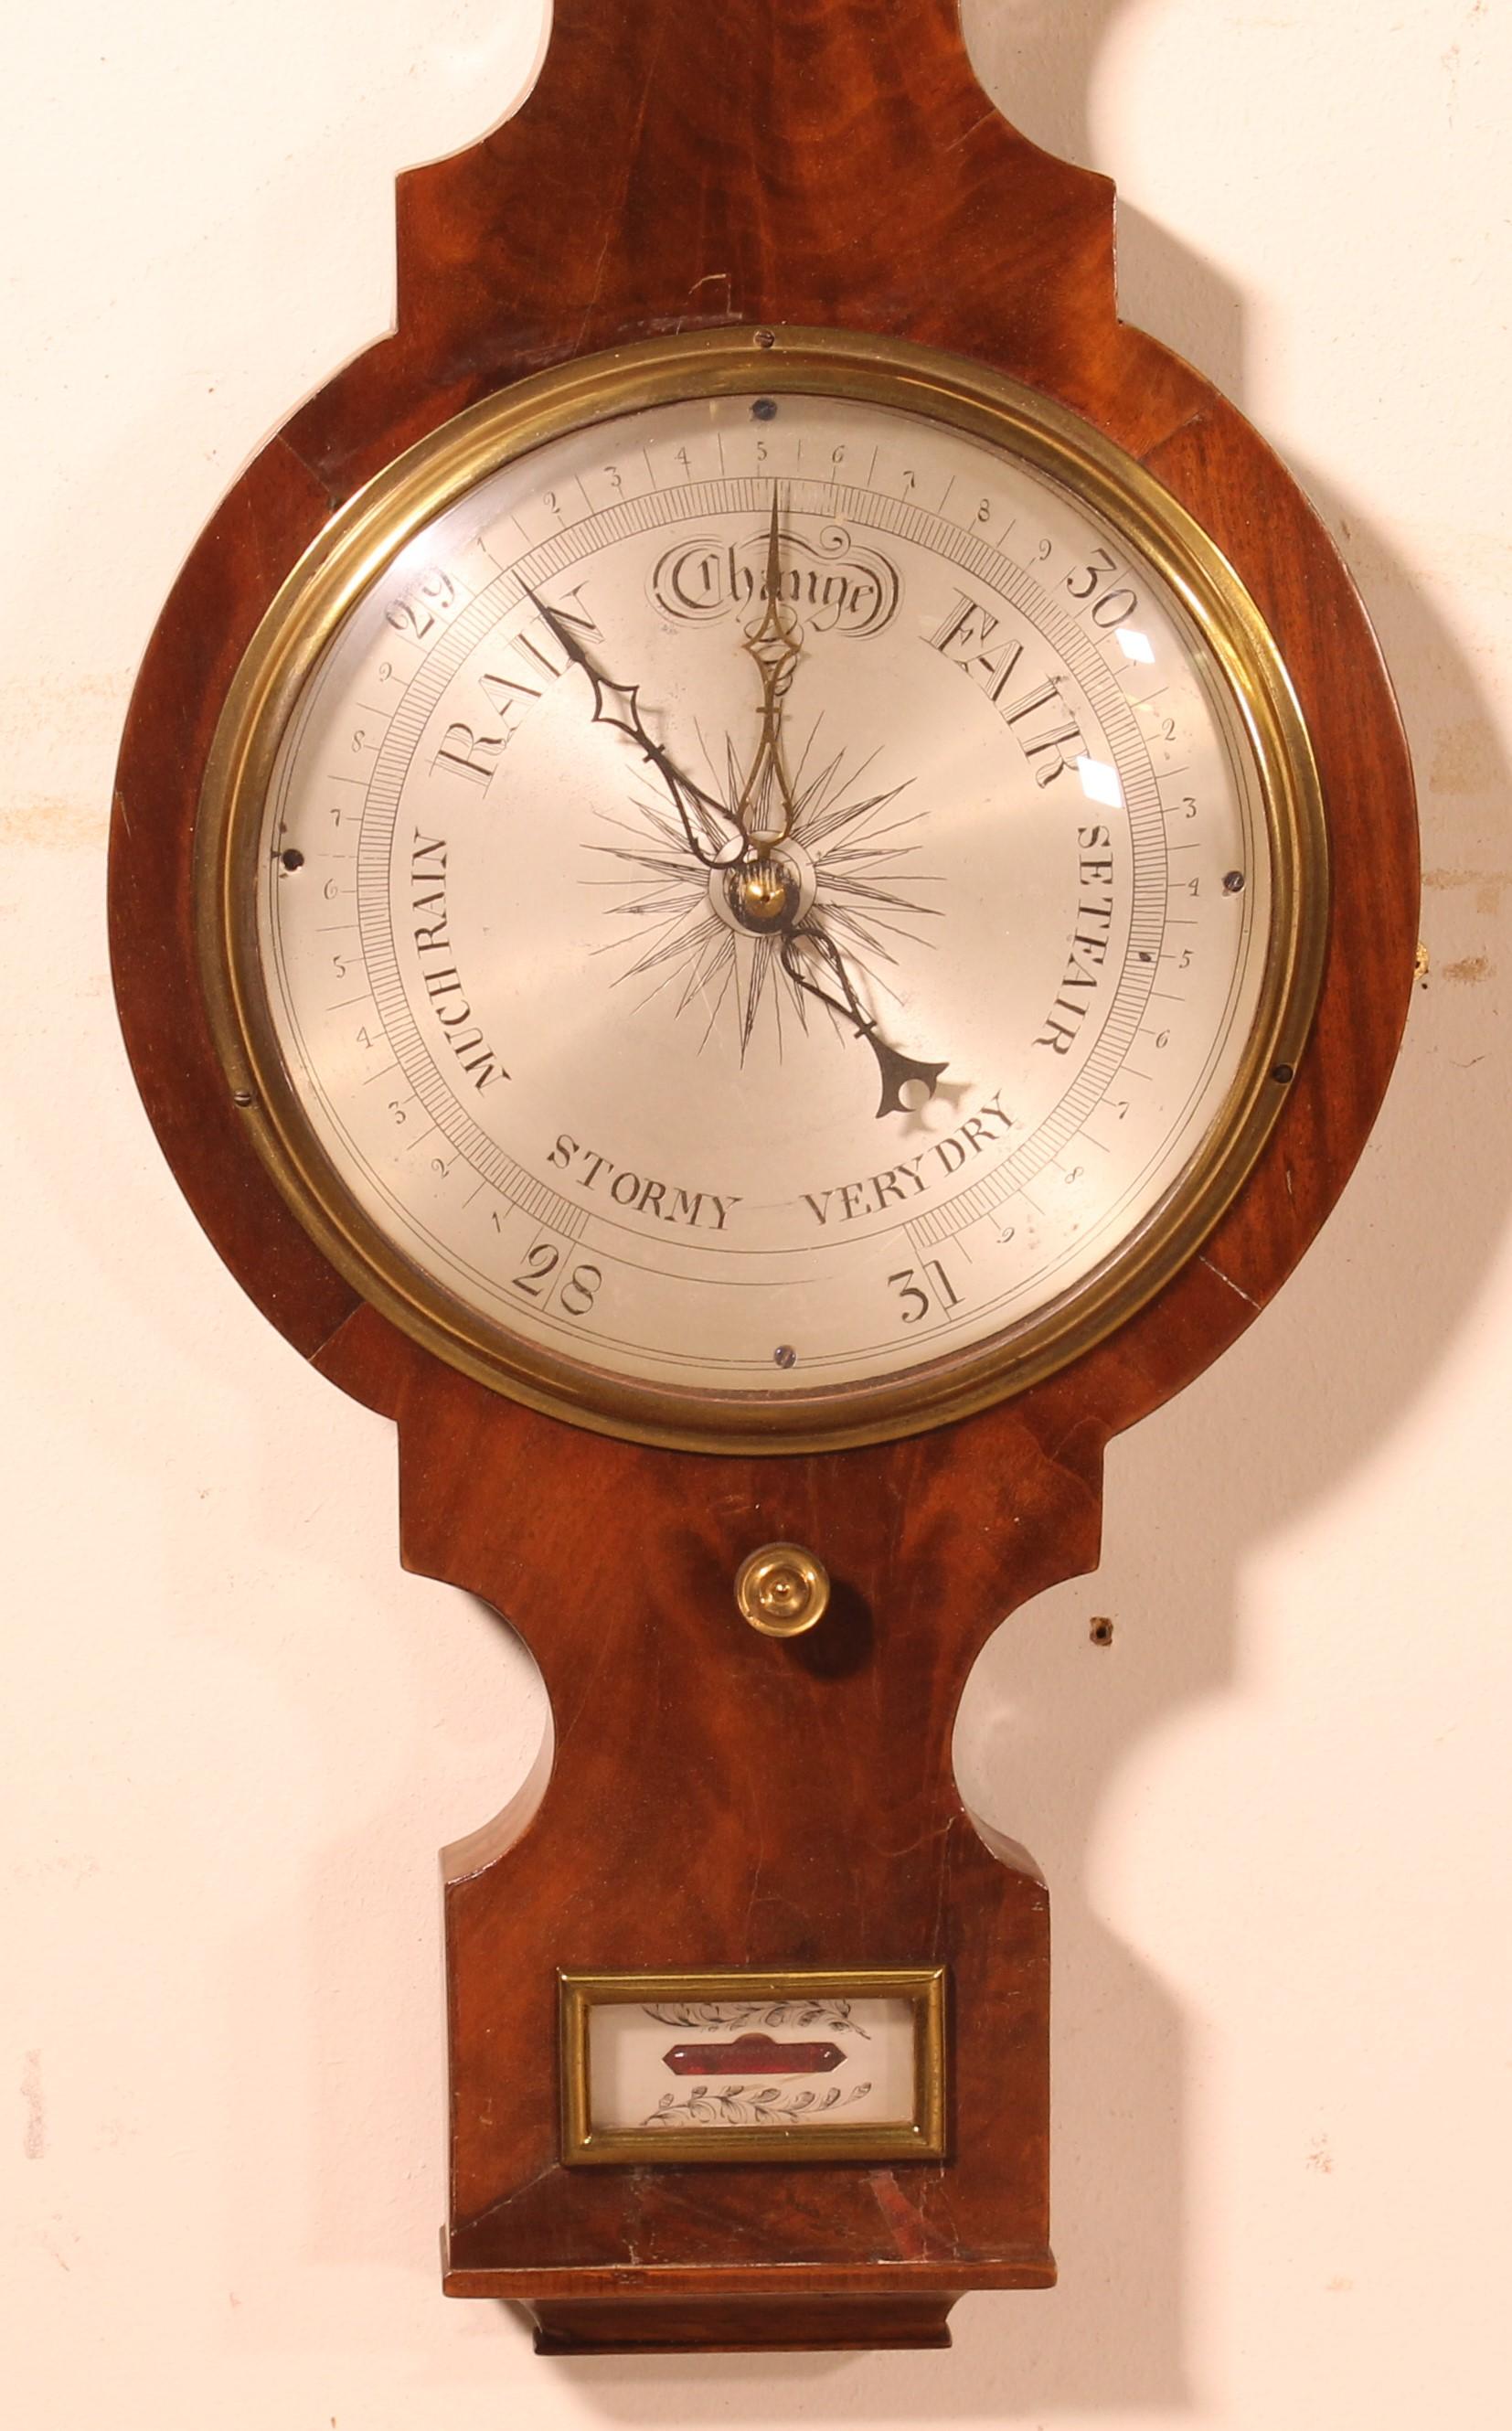 walnut barometer from the 19th century from England

The thermometer works and the barometer mechanism is present

In superb condition and very beautiful patina